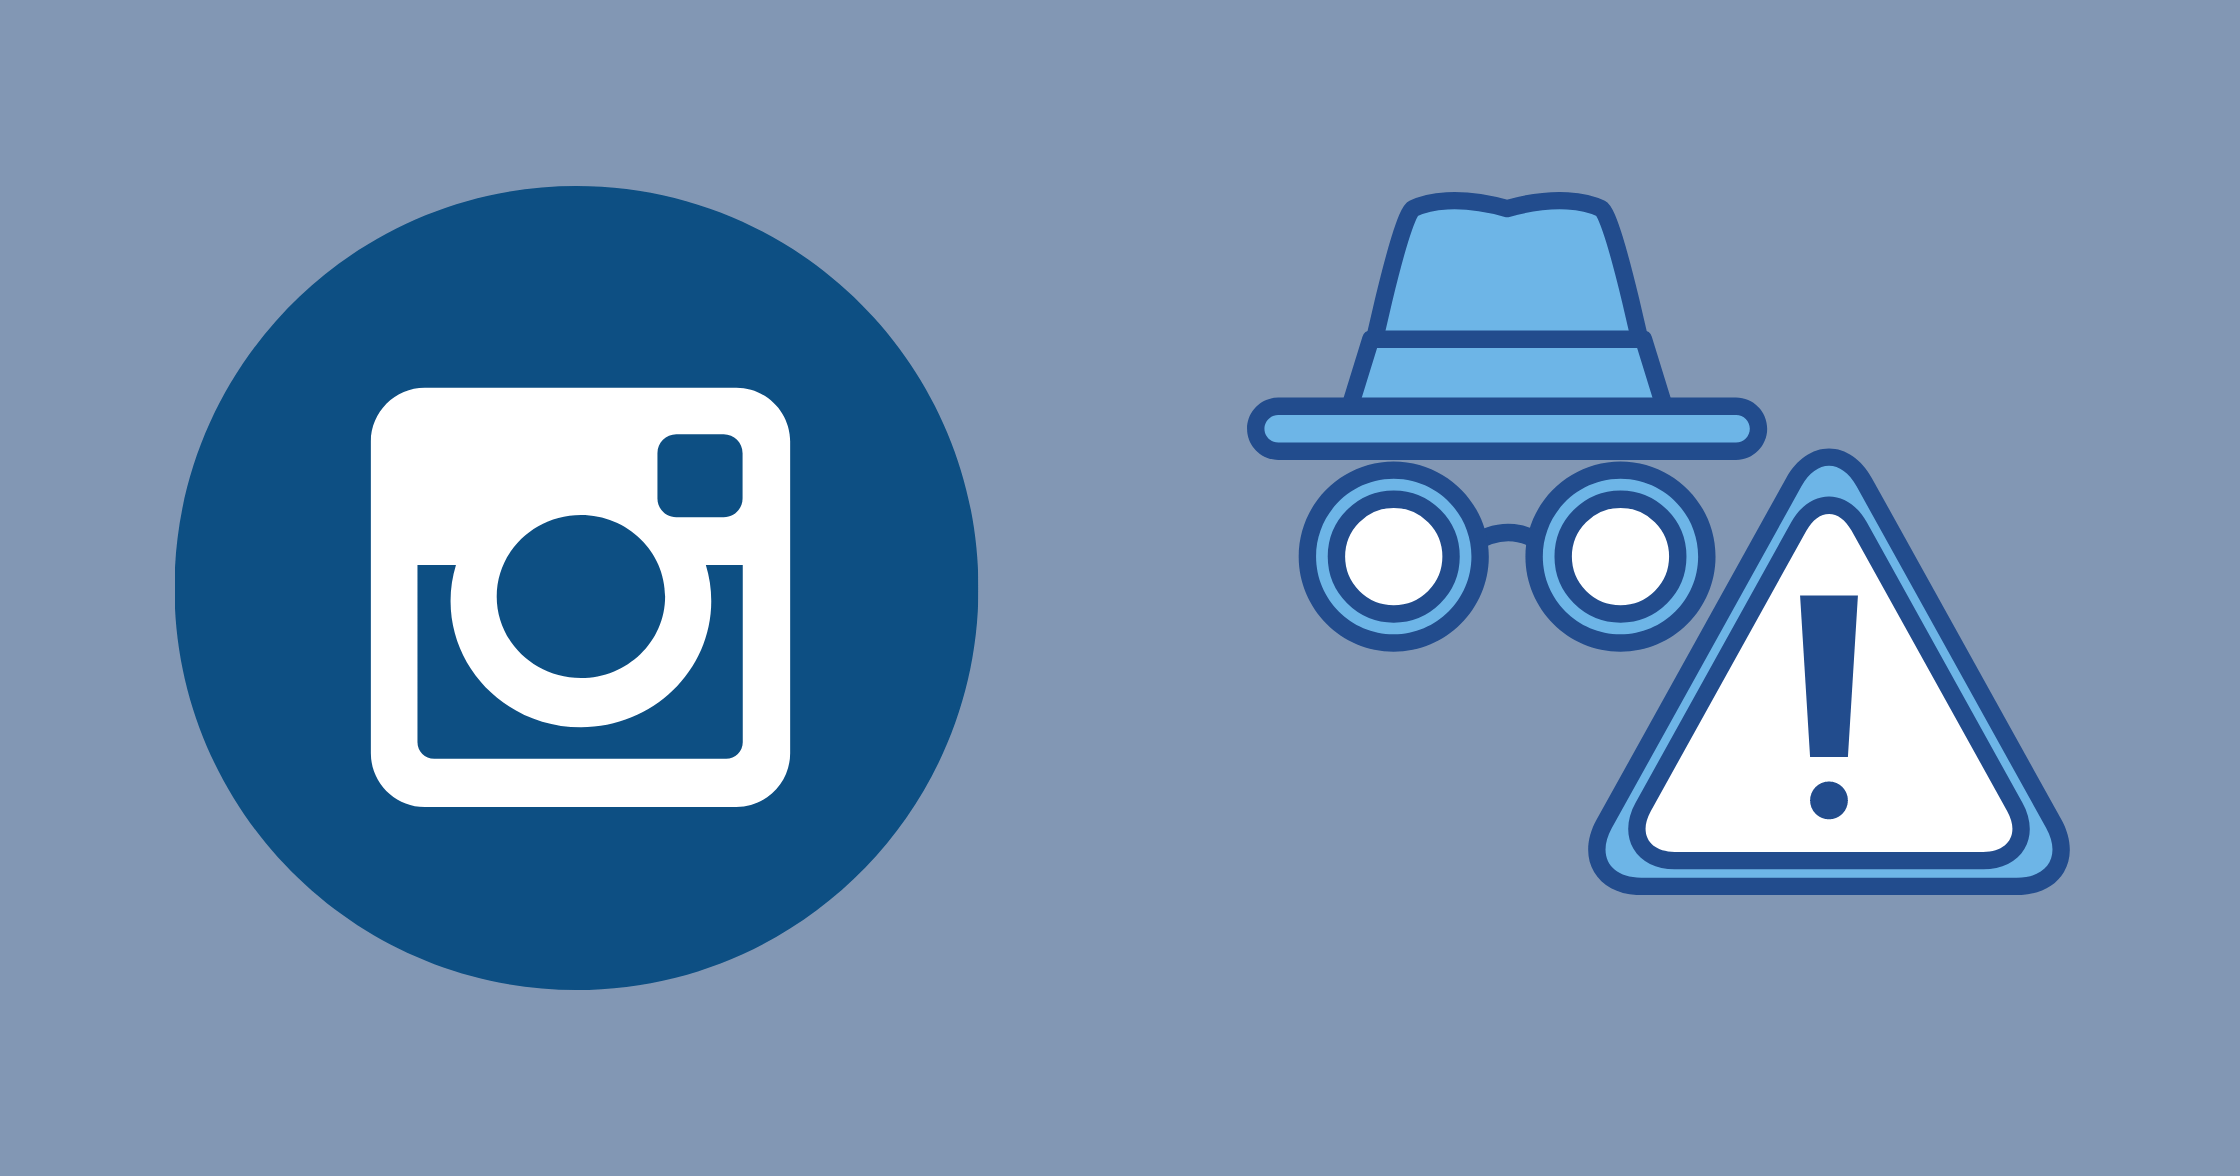 How To Fix A Suspicious Login Attempt On Instagram